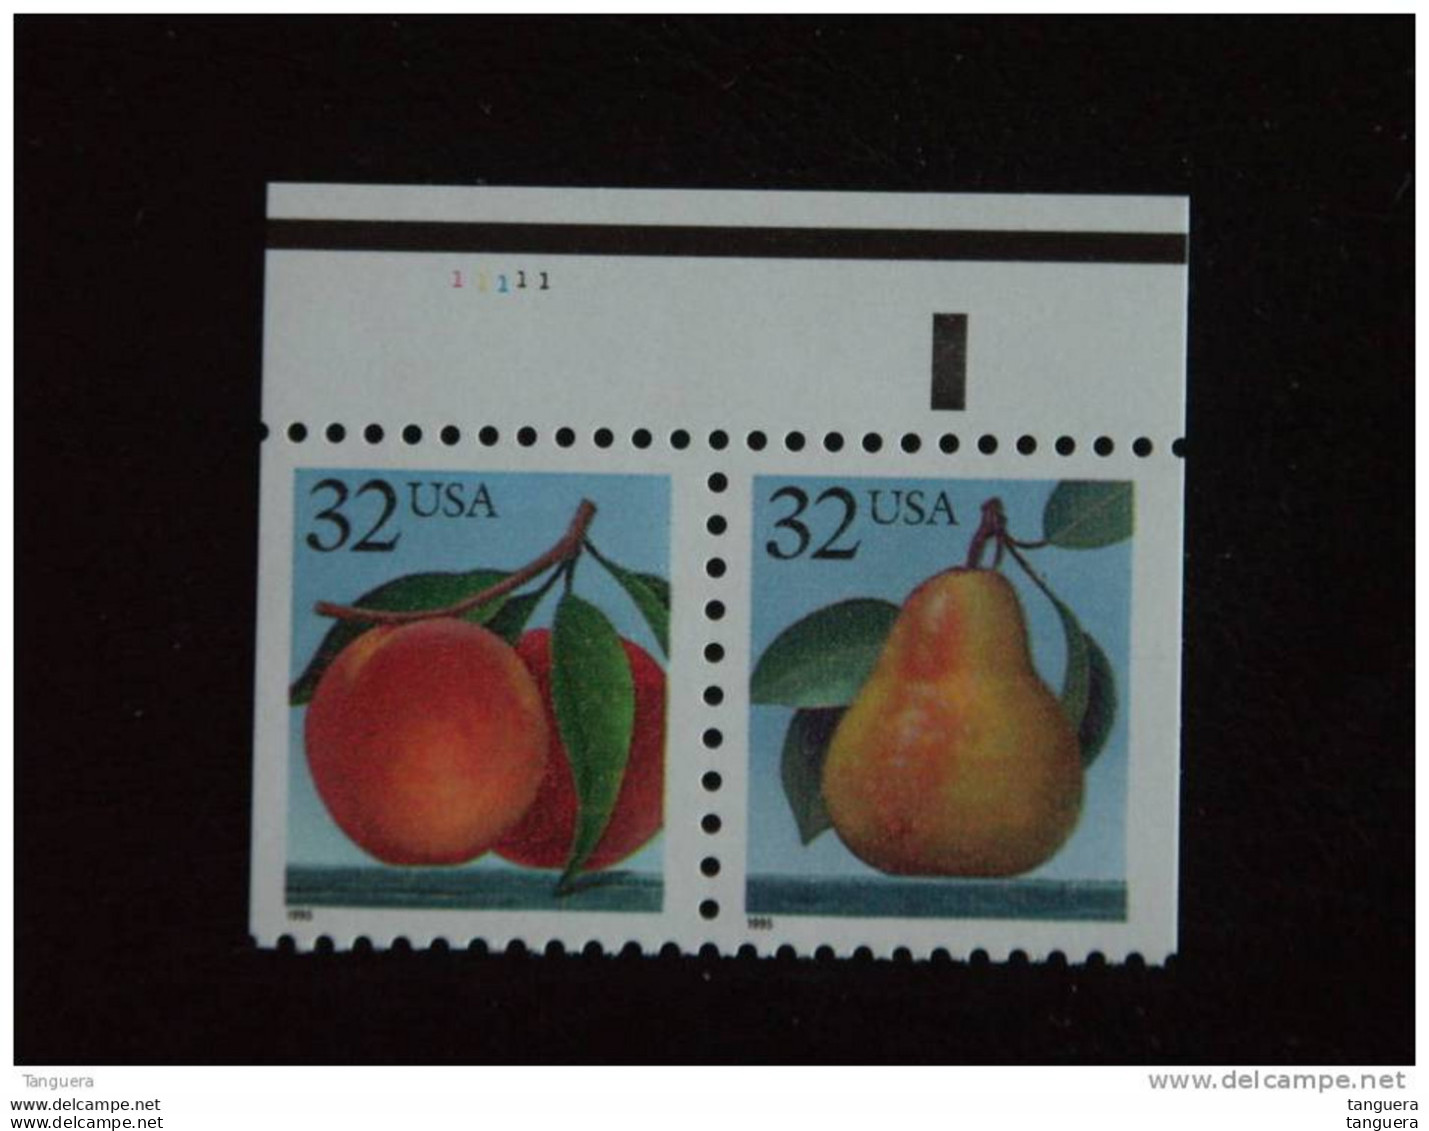 USA Etats-Unis United States 1995 Peaches And Pears Fruit Yv 2382-2383 MNH ** Plate N° 1111 - Nuevos